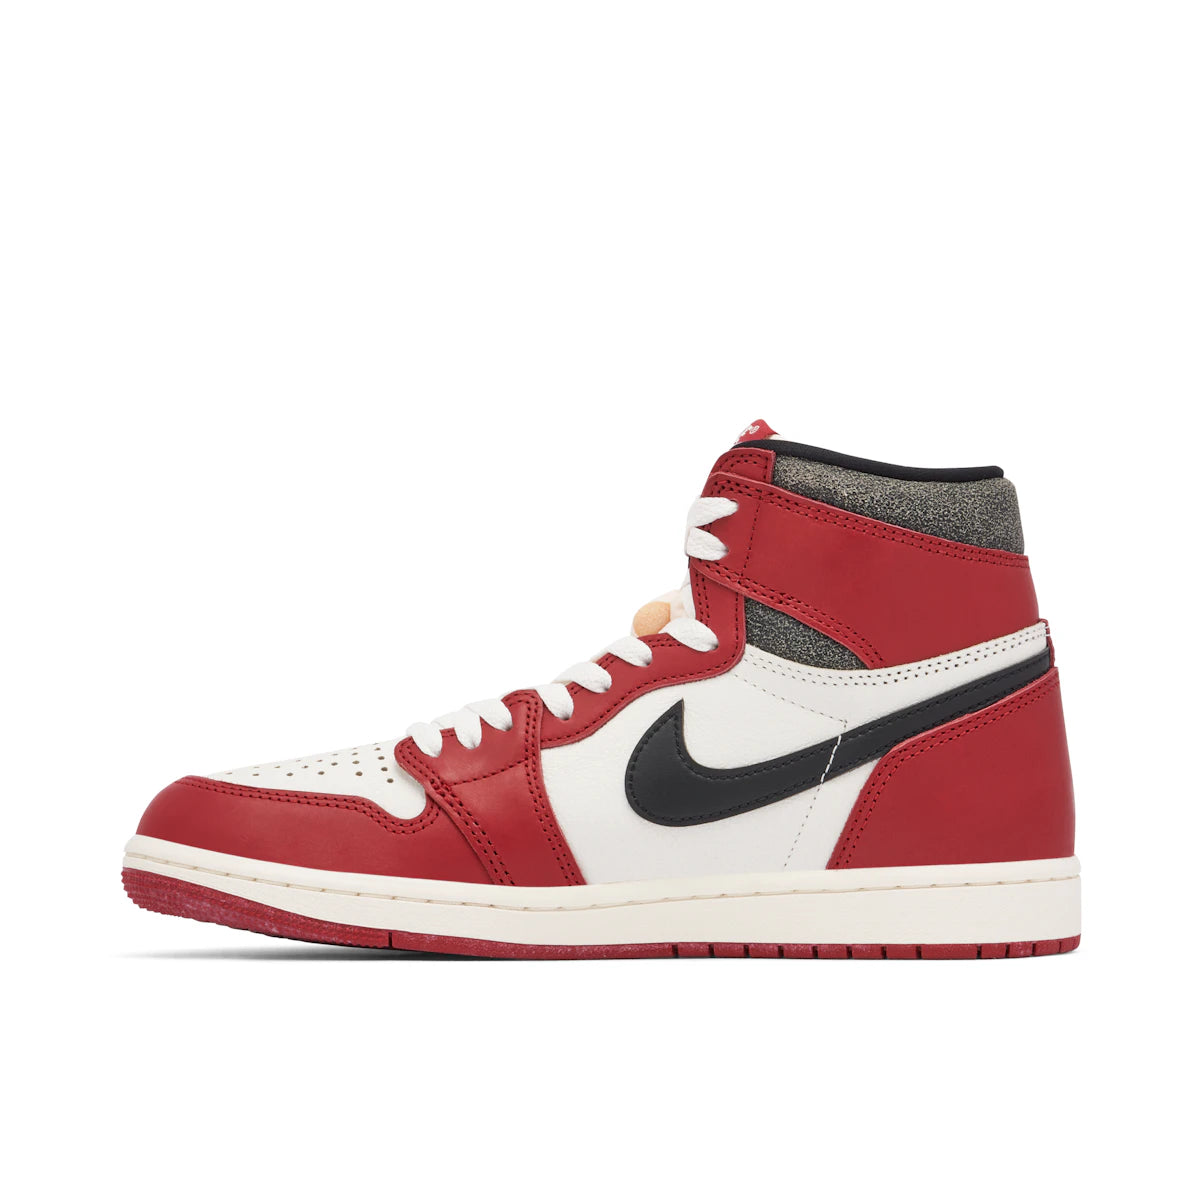 Jordan 1 Retro High OG Chicago Lost and Found by Jordan's from £375.00